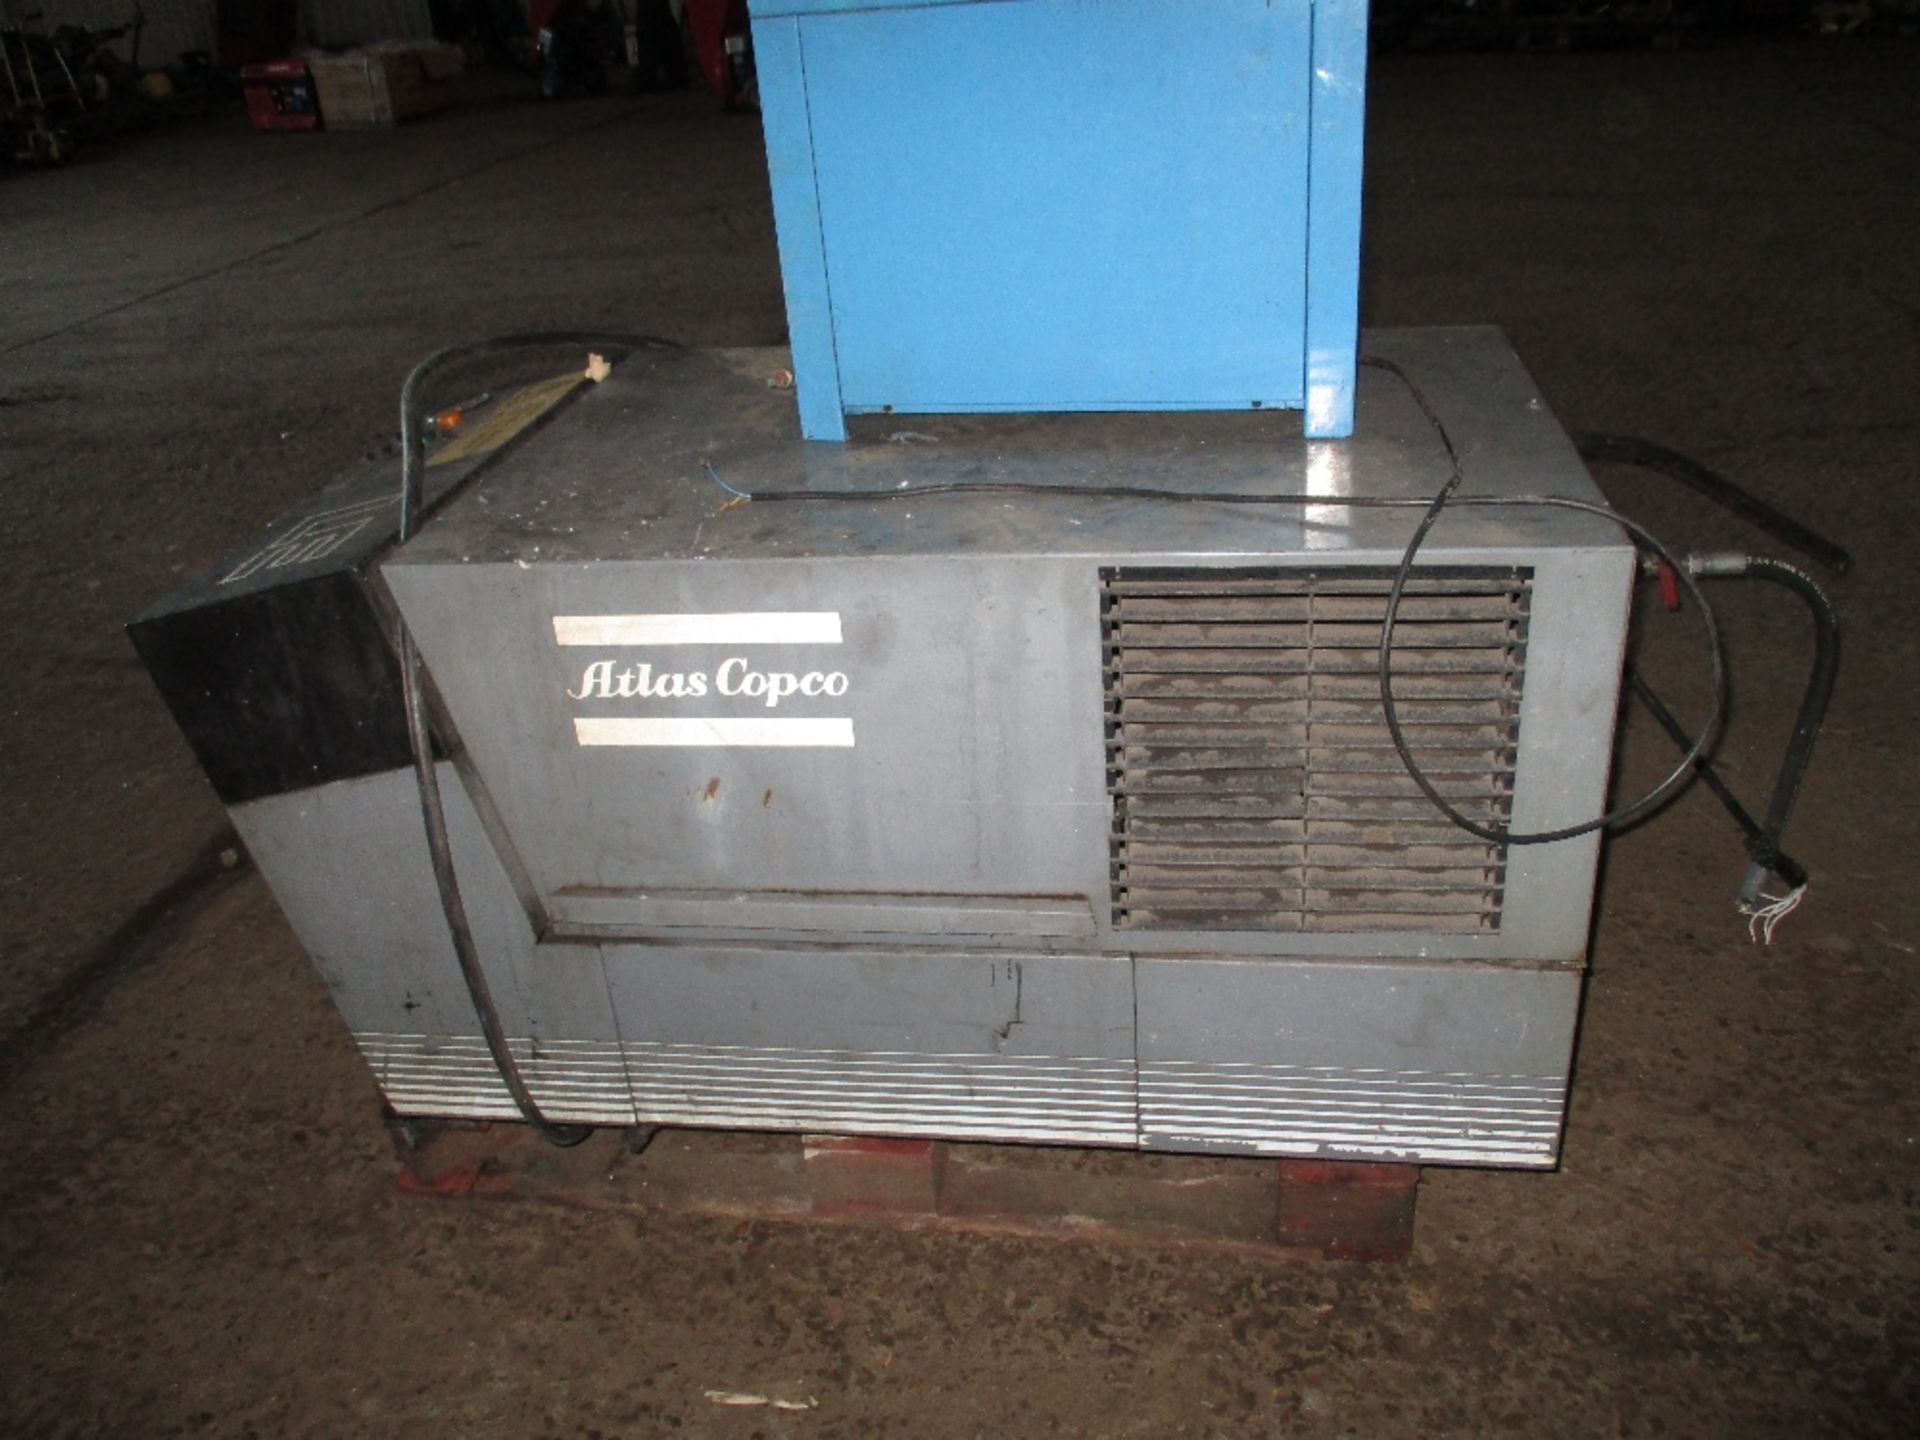 Atlas Copco packaged air compressor with receiver sourced from garage company liquidation